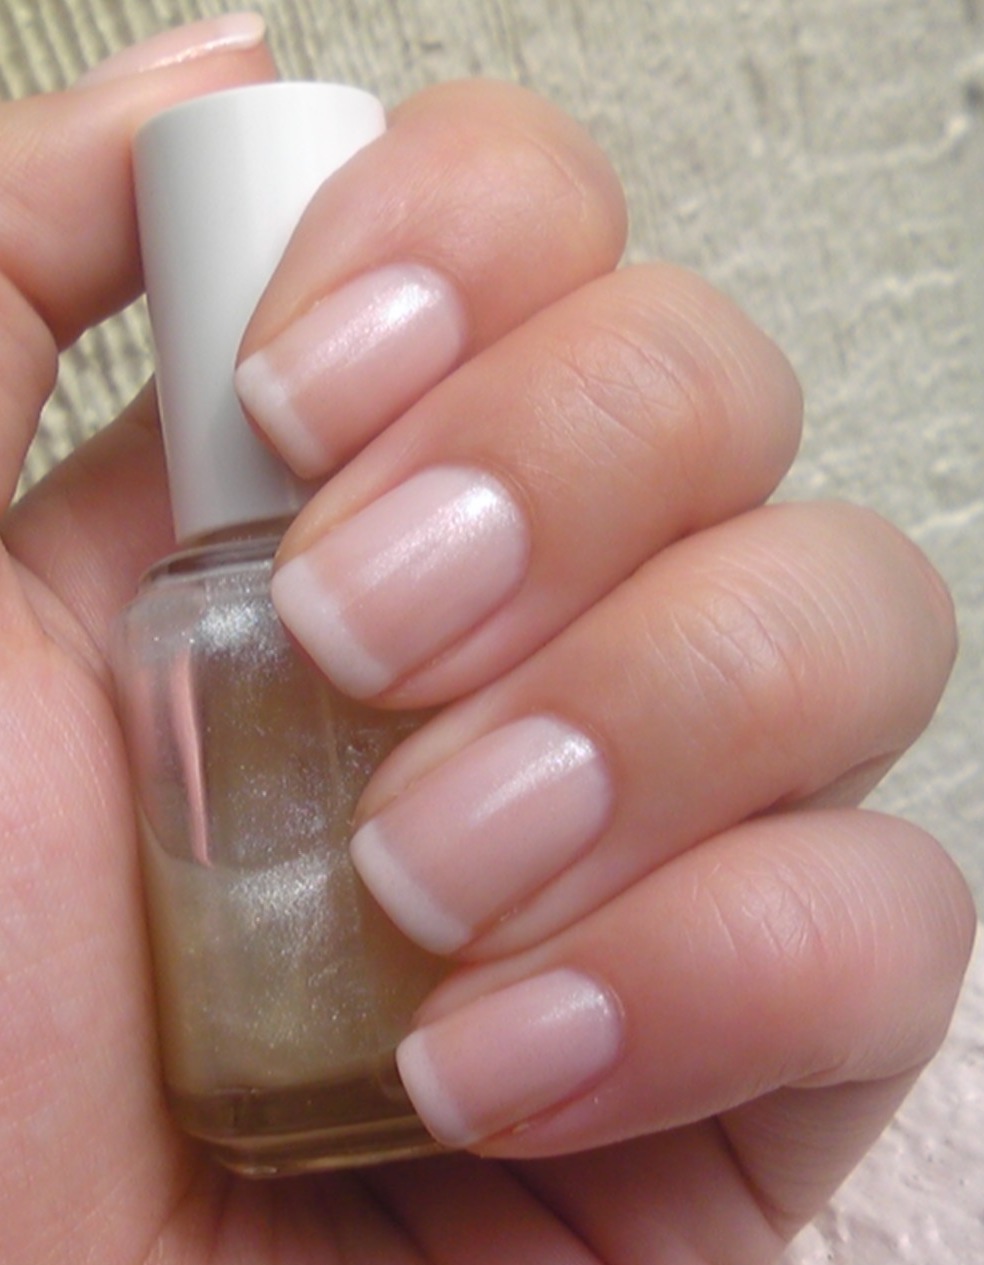 French manicure: our tips to a perfect one - Essie